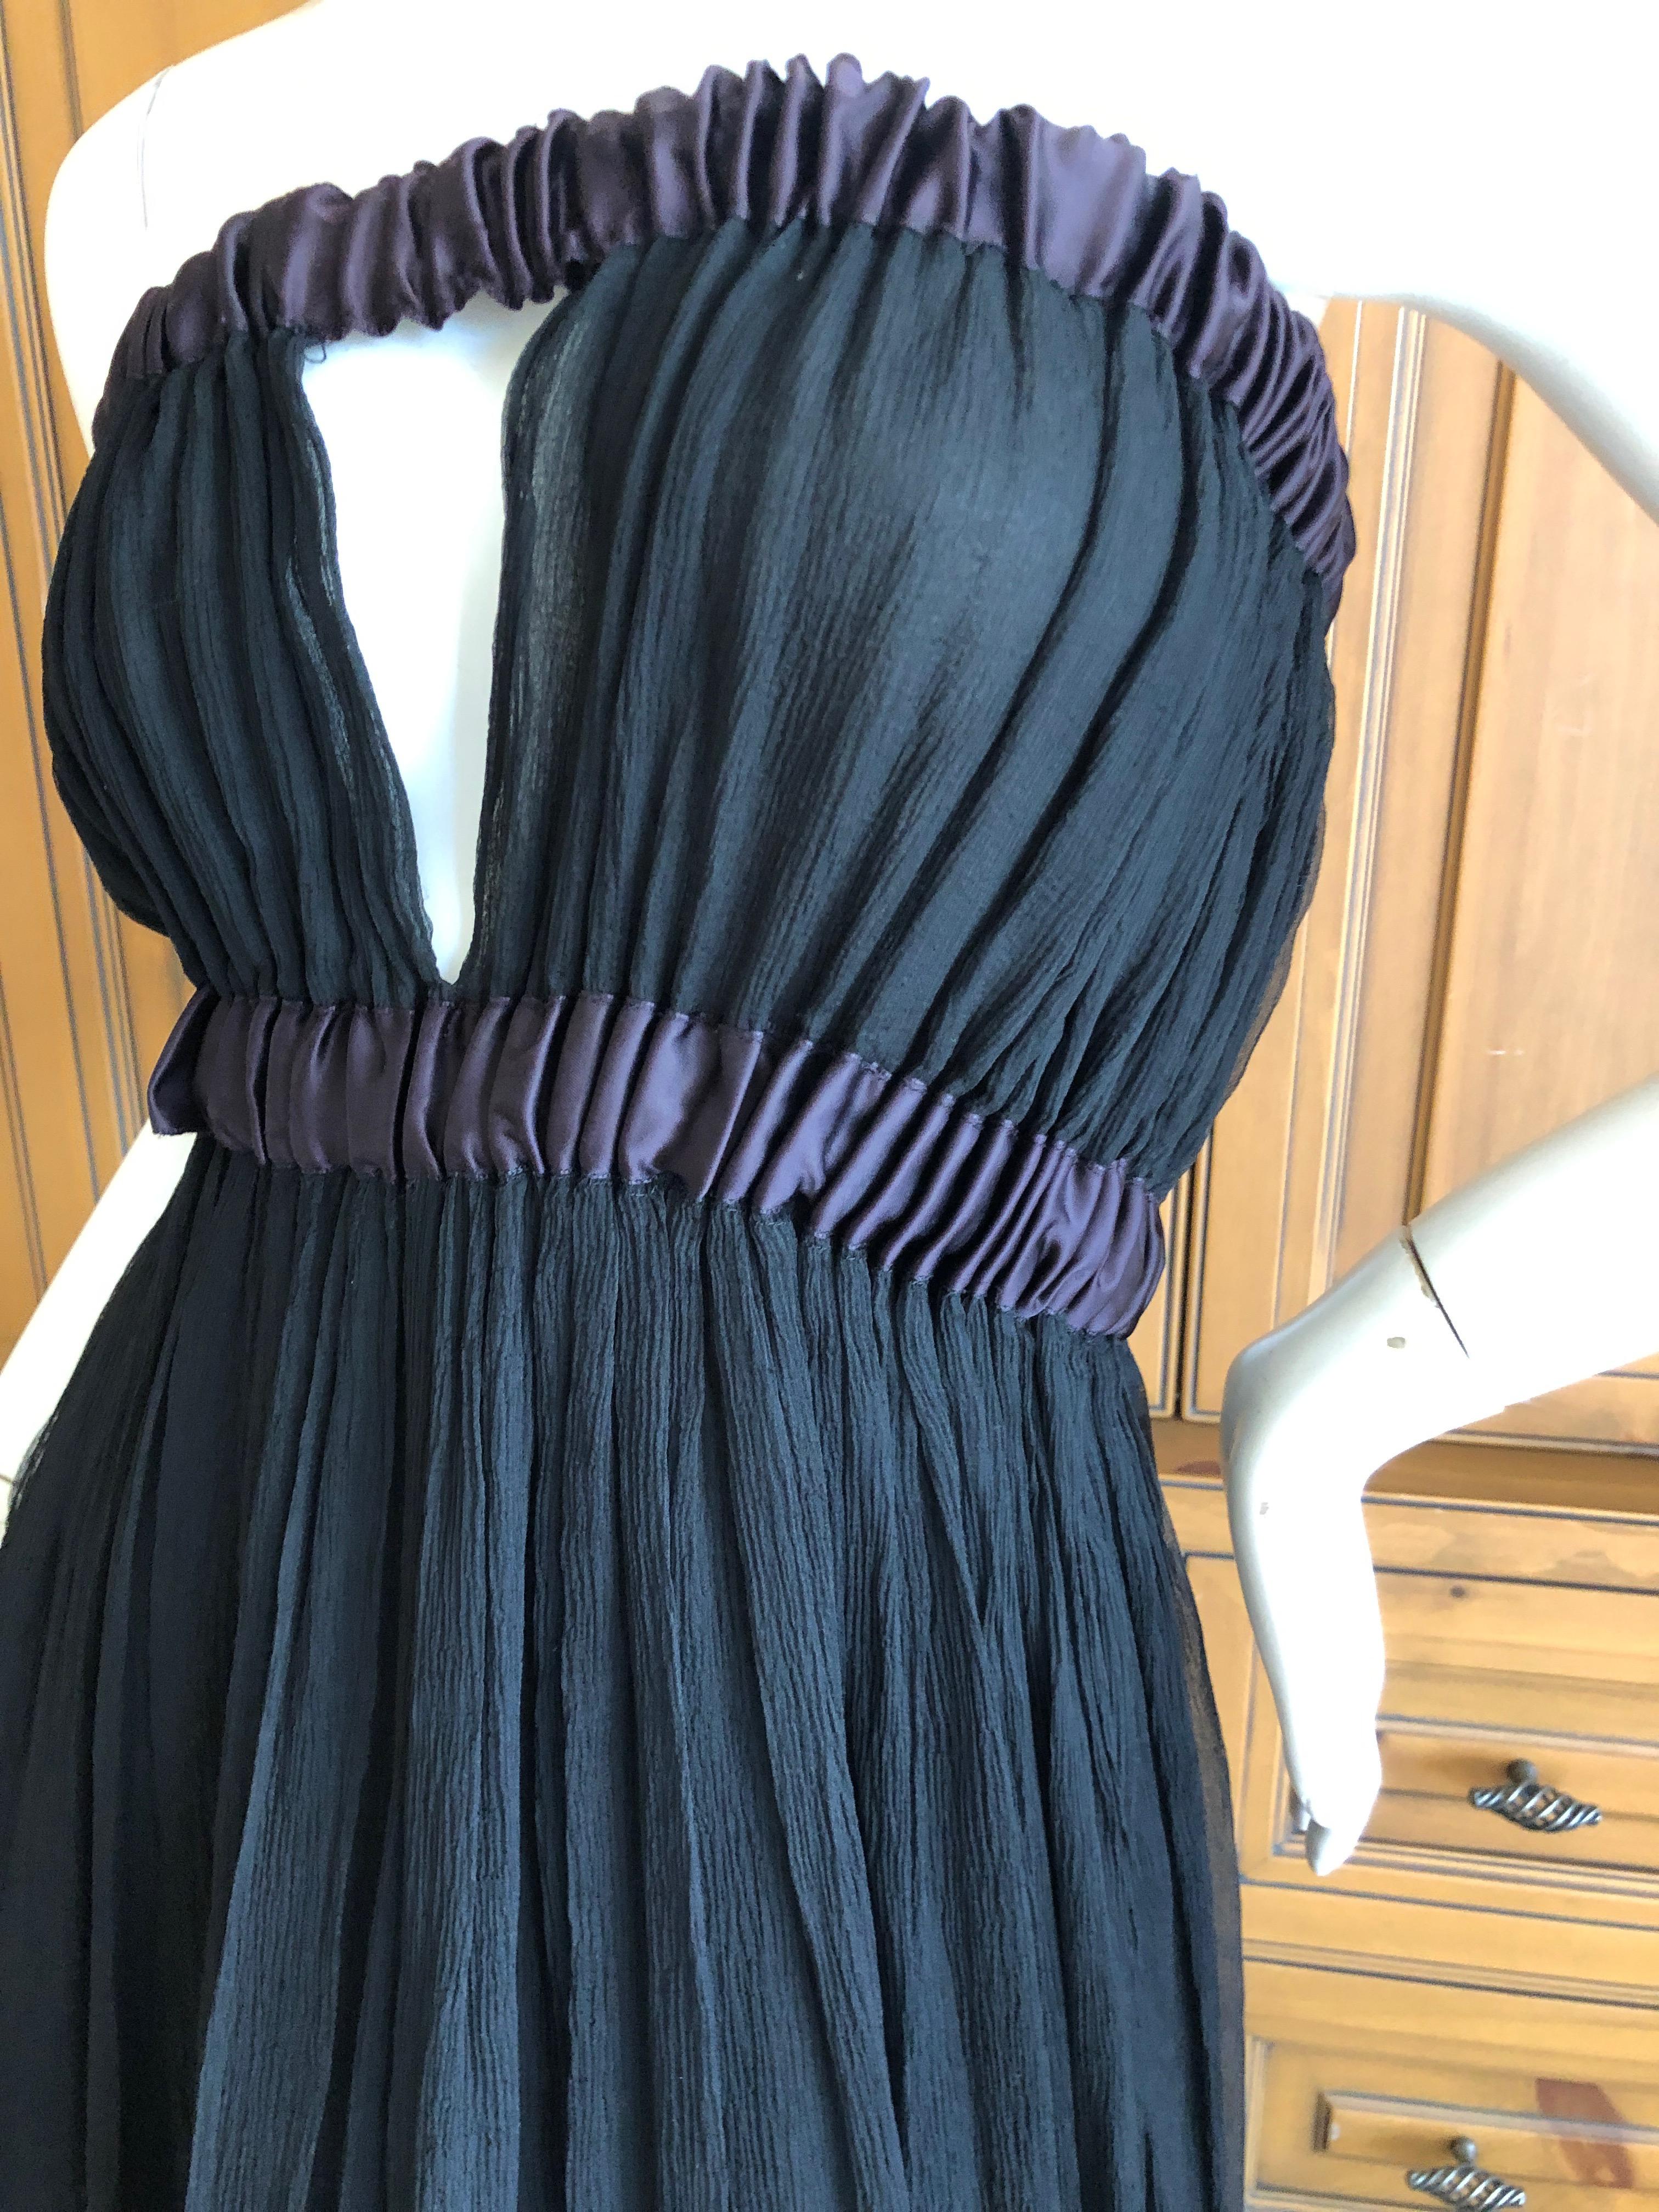 Yves Saint Laurent Rive Gauche Black Pleated Strapless Keyhole Dress  In Excellent Condition For Sale In Cloverdale, CA